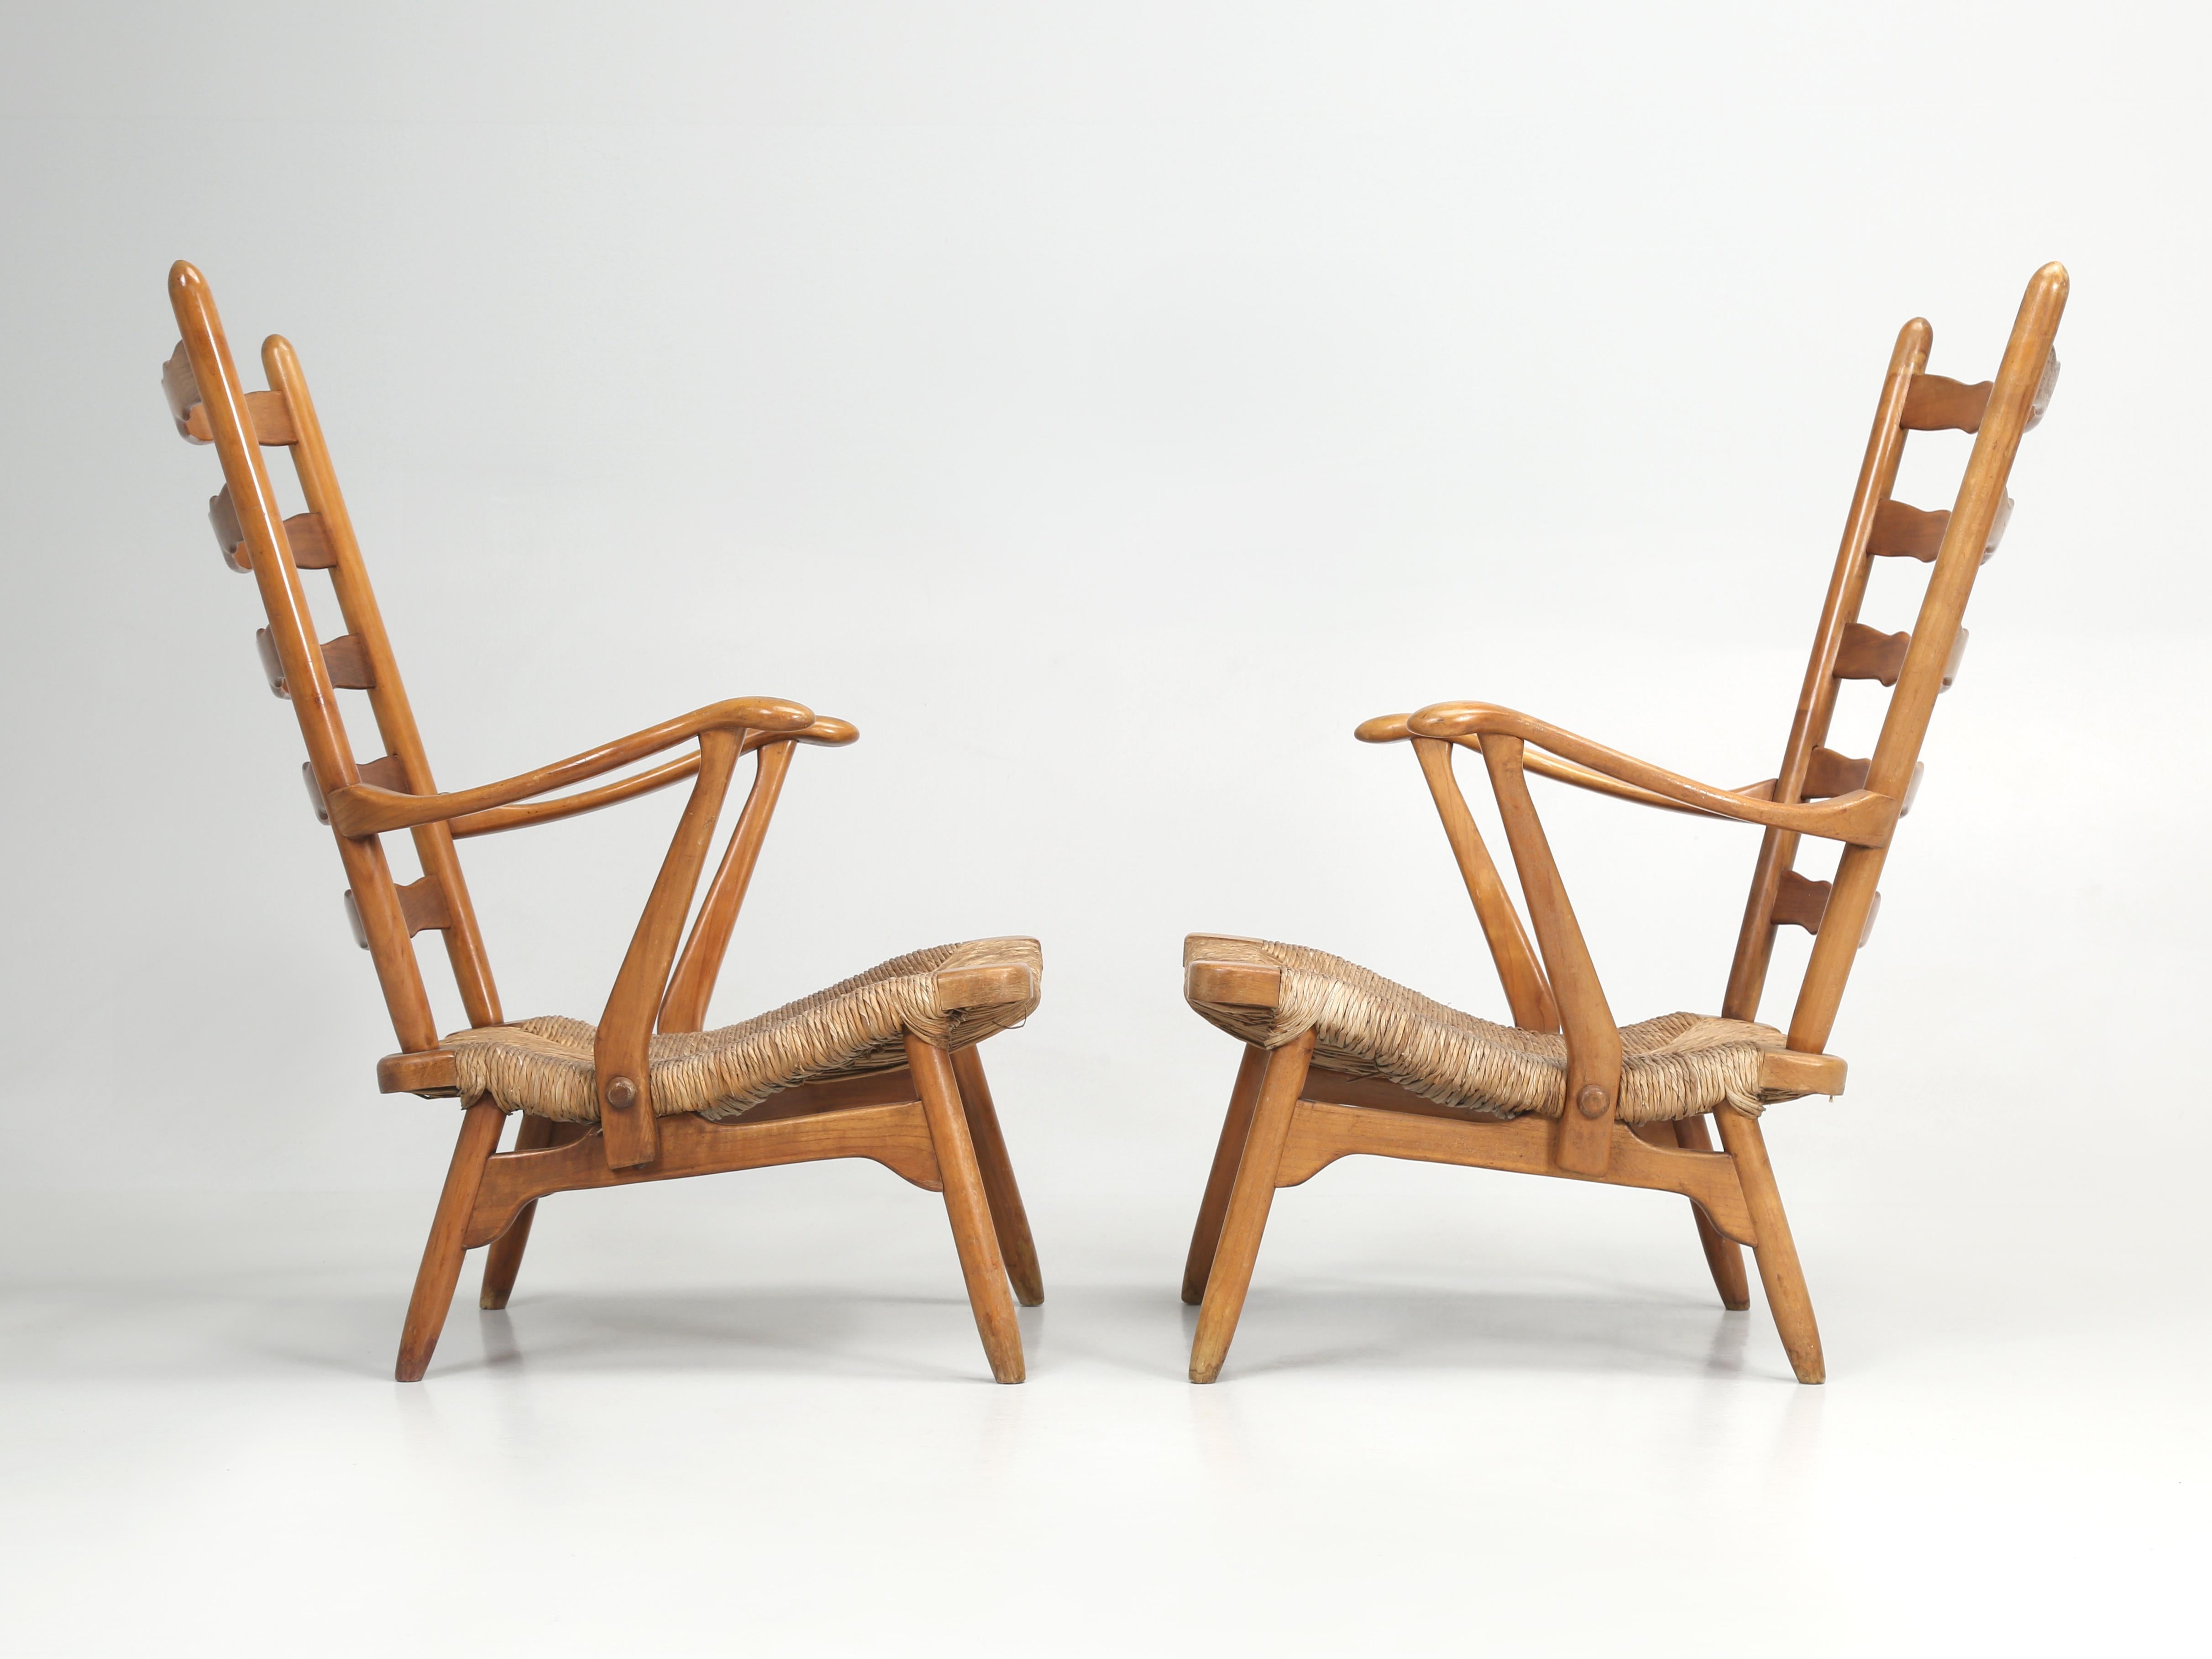 Pair of Mid-Century Modern Scandinavia Arm Chairs with Rush Hand-Woven Seating surfaces. The pair of Scandinavian Arm Chairs were left purposely unrestored when it comes to the clear-coating on the Scandinavian Arm Chairs wood frames. In our